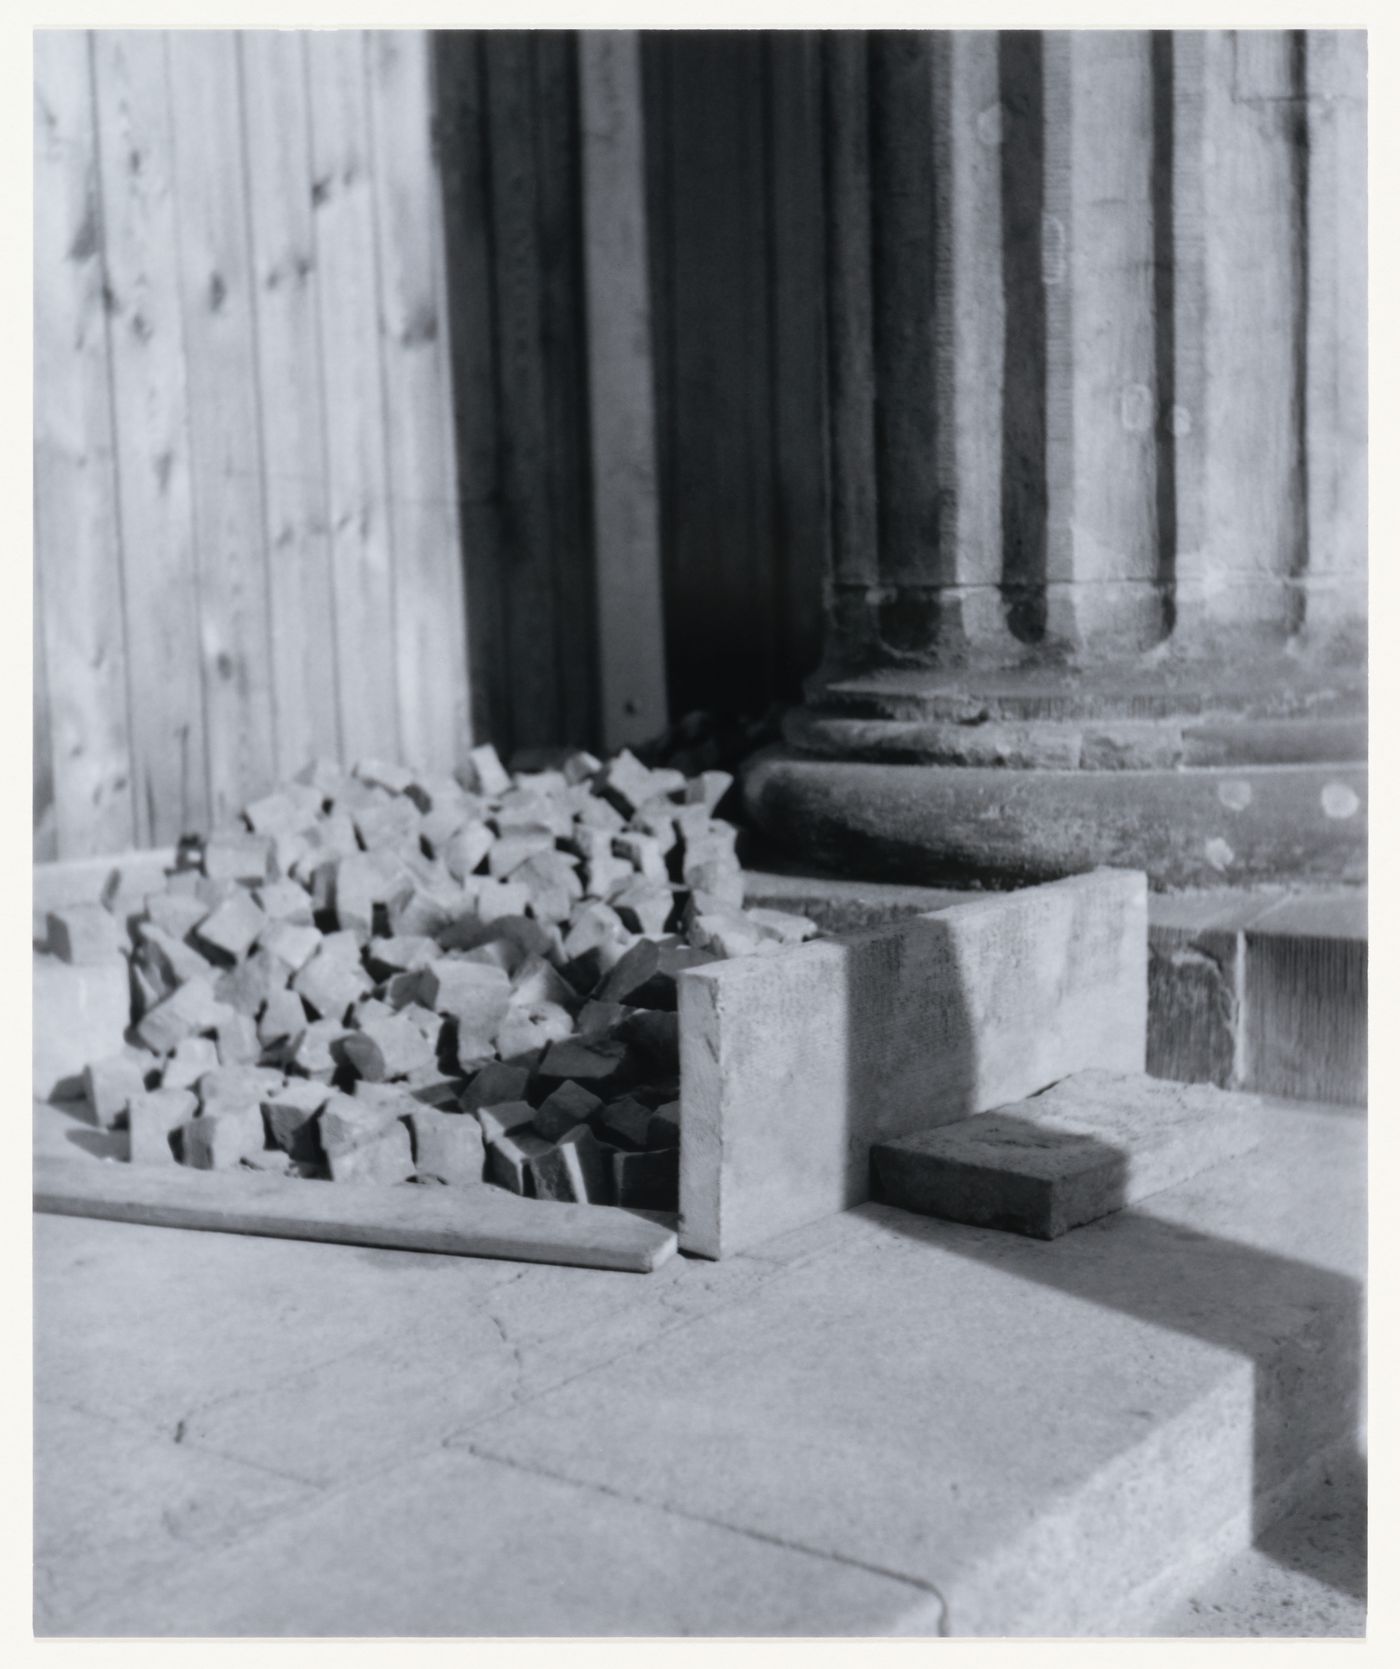 View of stones and building materials, a column, a step and wooden panels, Berlin, Germany, from the artist book "The Potsdamer Project"